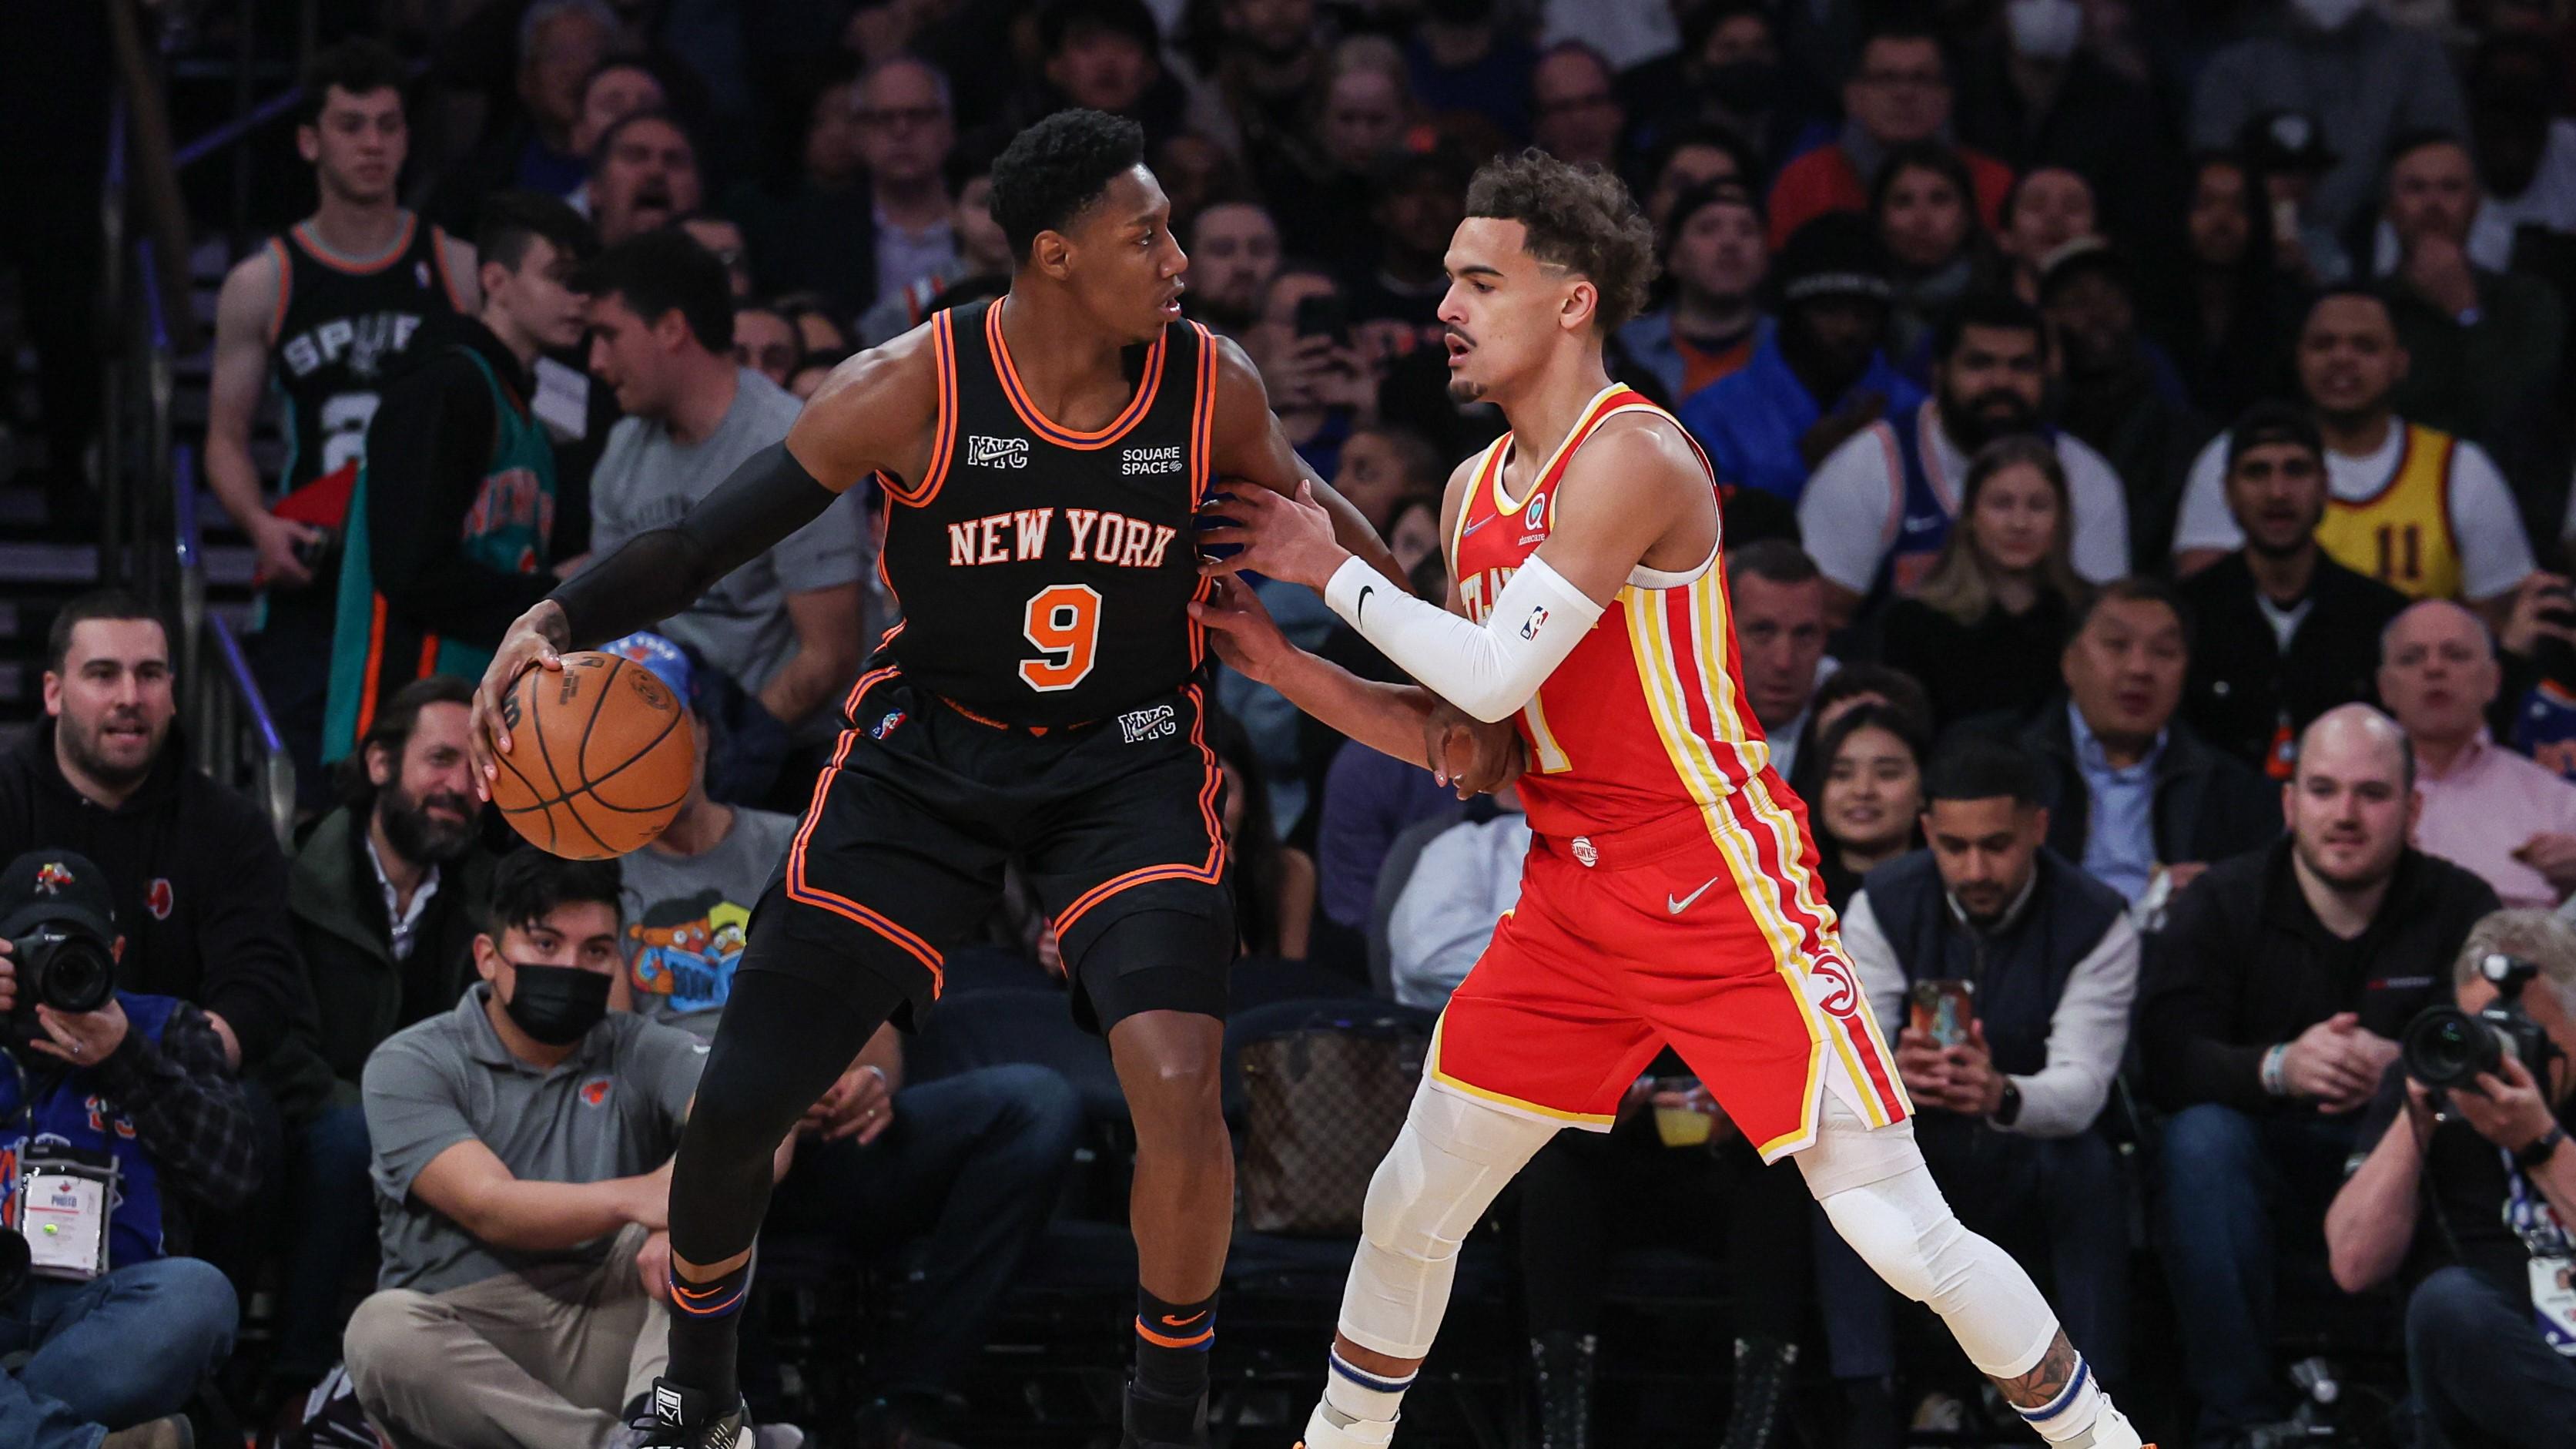 Mar 22, 2022; New York, New York, USA; New York Knicks guard RJ Barrett (9) dribbles against Atlanta Hawks guard Trae Young (11) during the first quarter at Madison Square Garden. / Vincent Carchietta-USA TODAY Sports